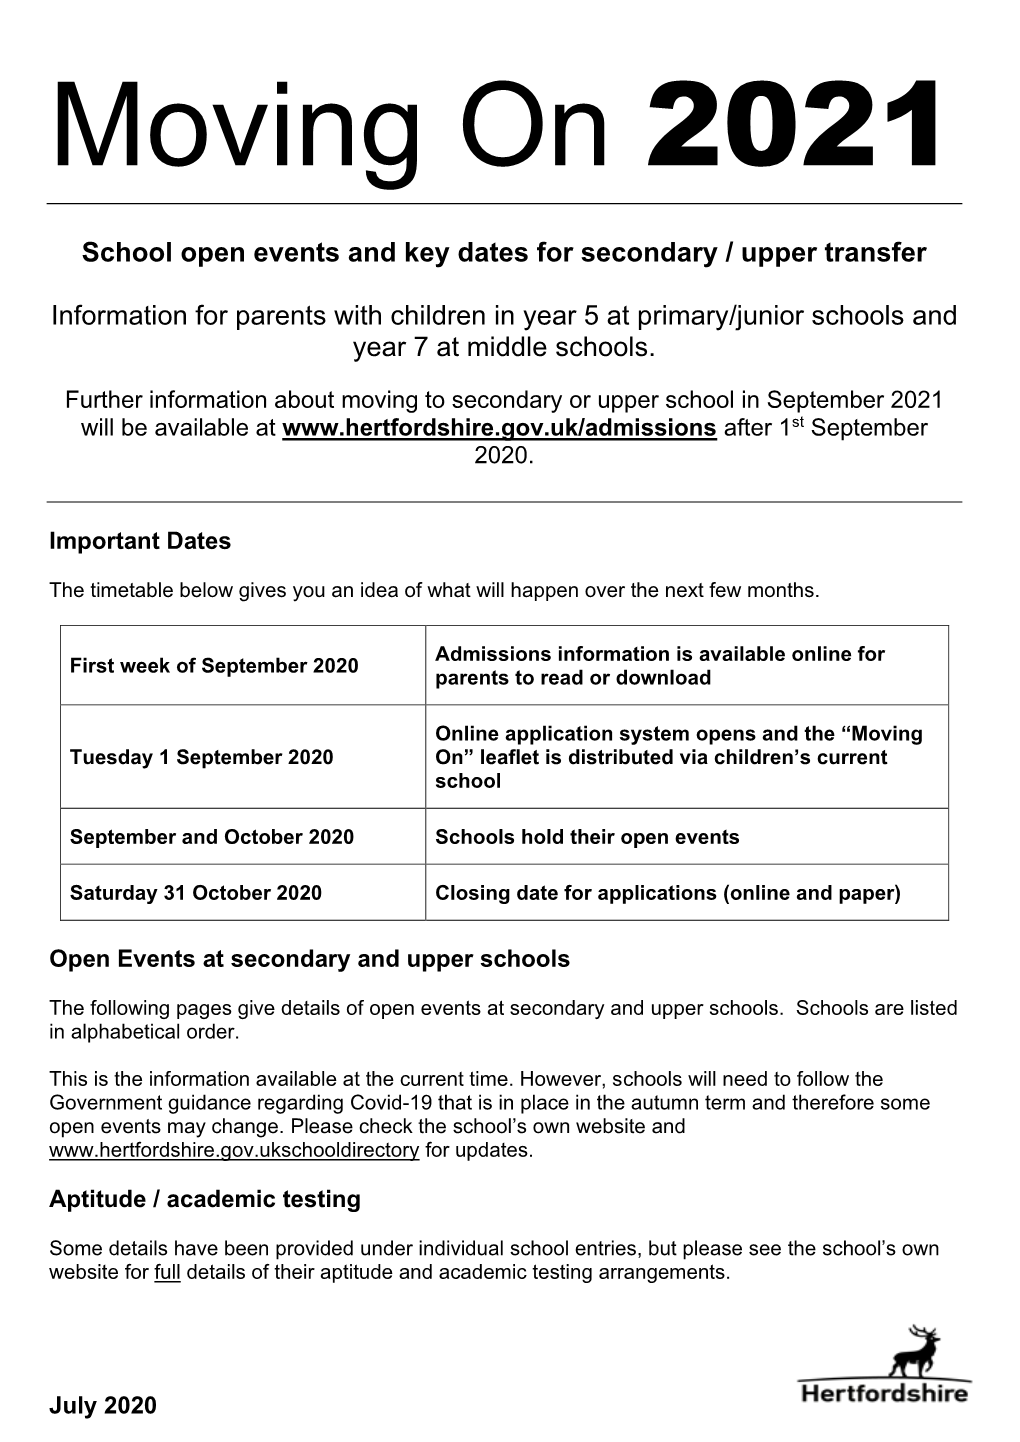 Moving on Open Events Leaflet 2021